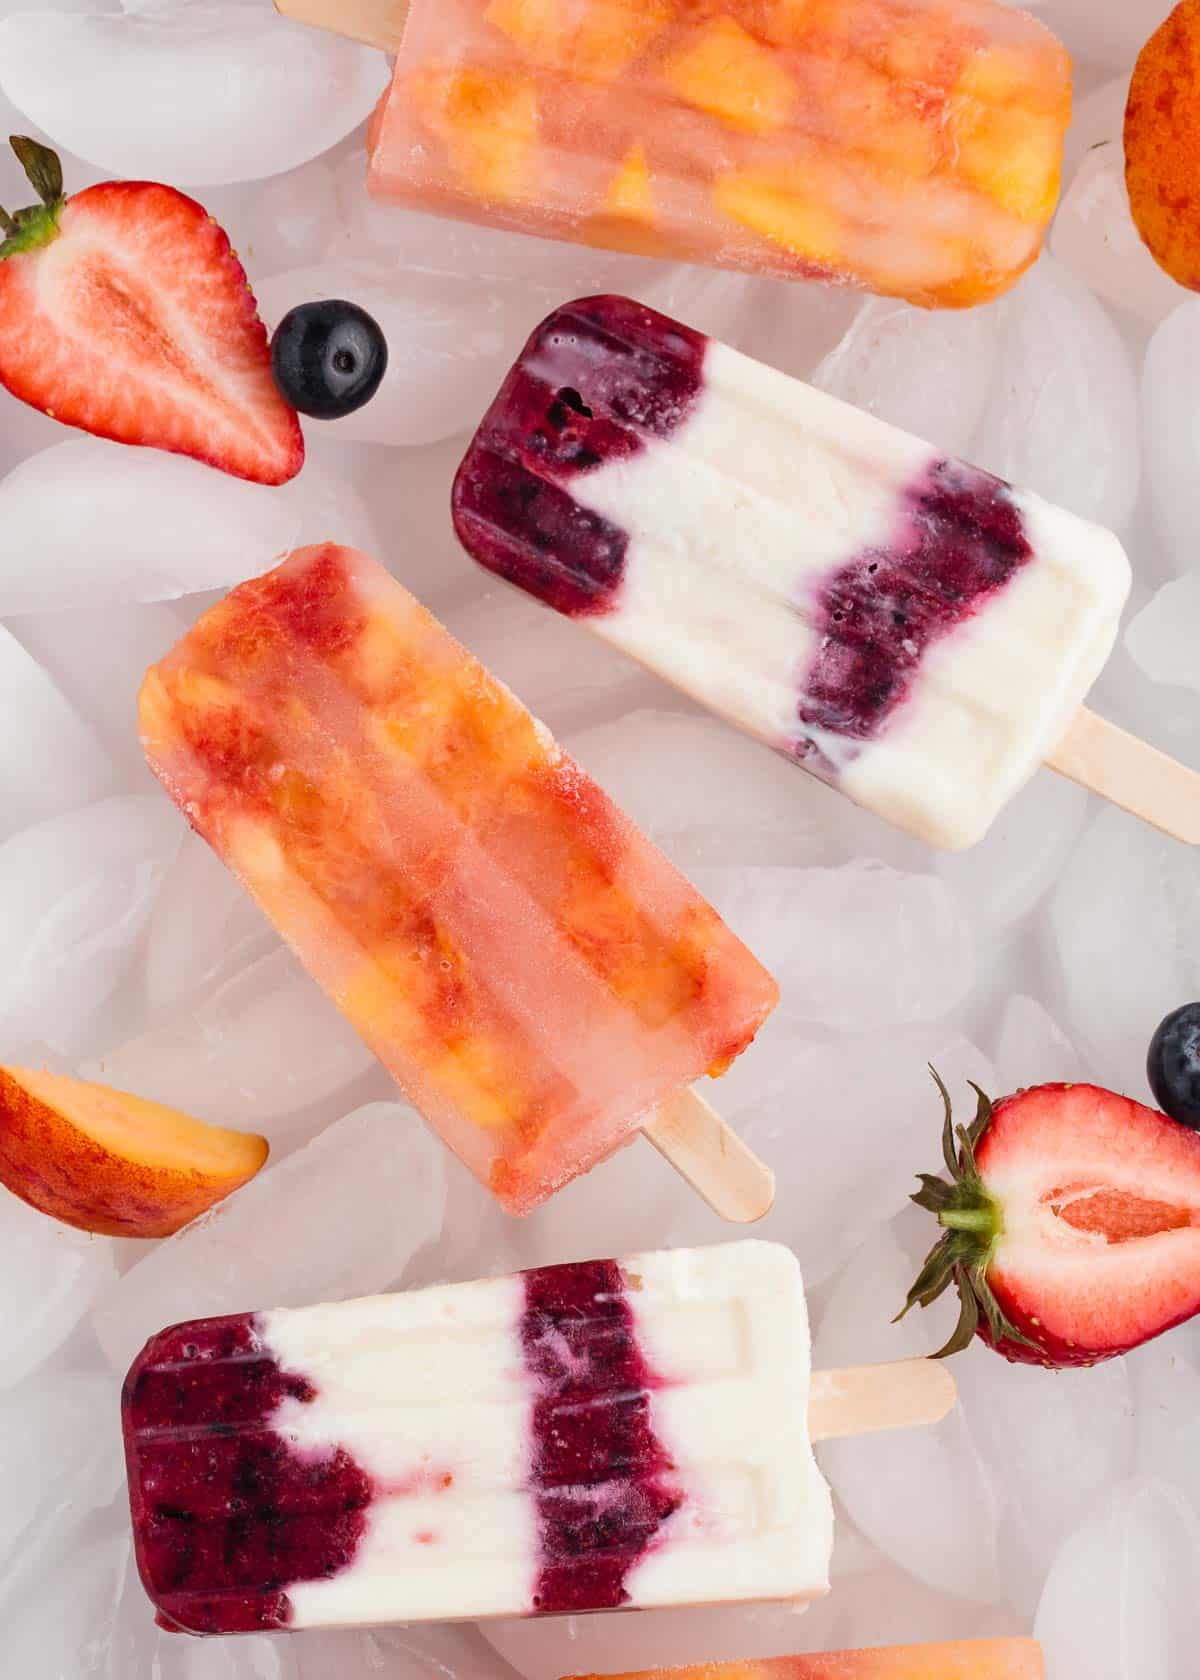 Popsicles on ice with fresh fruit.